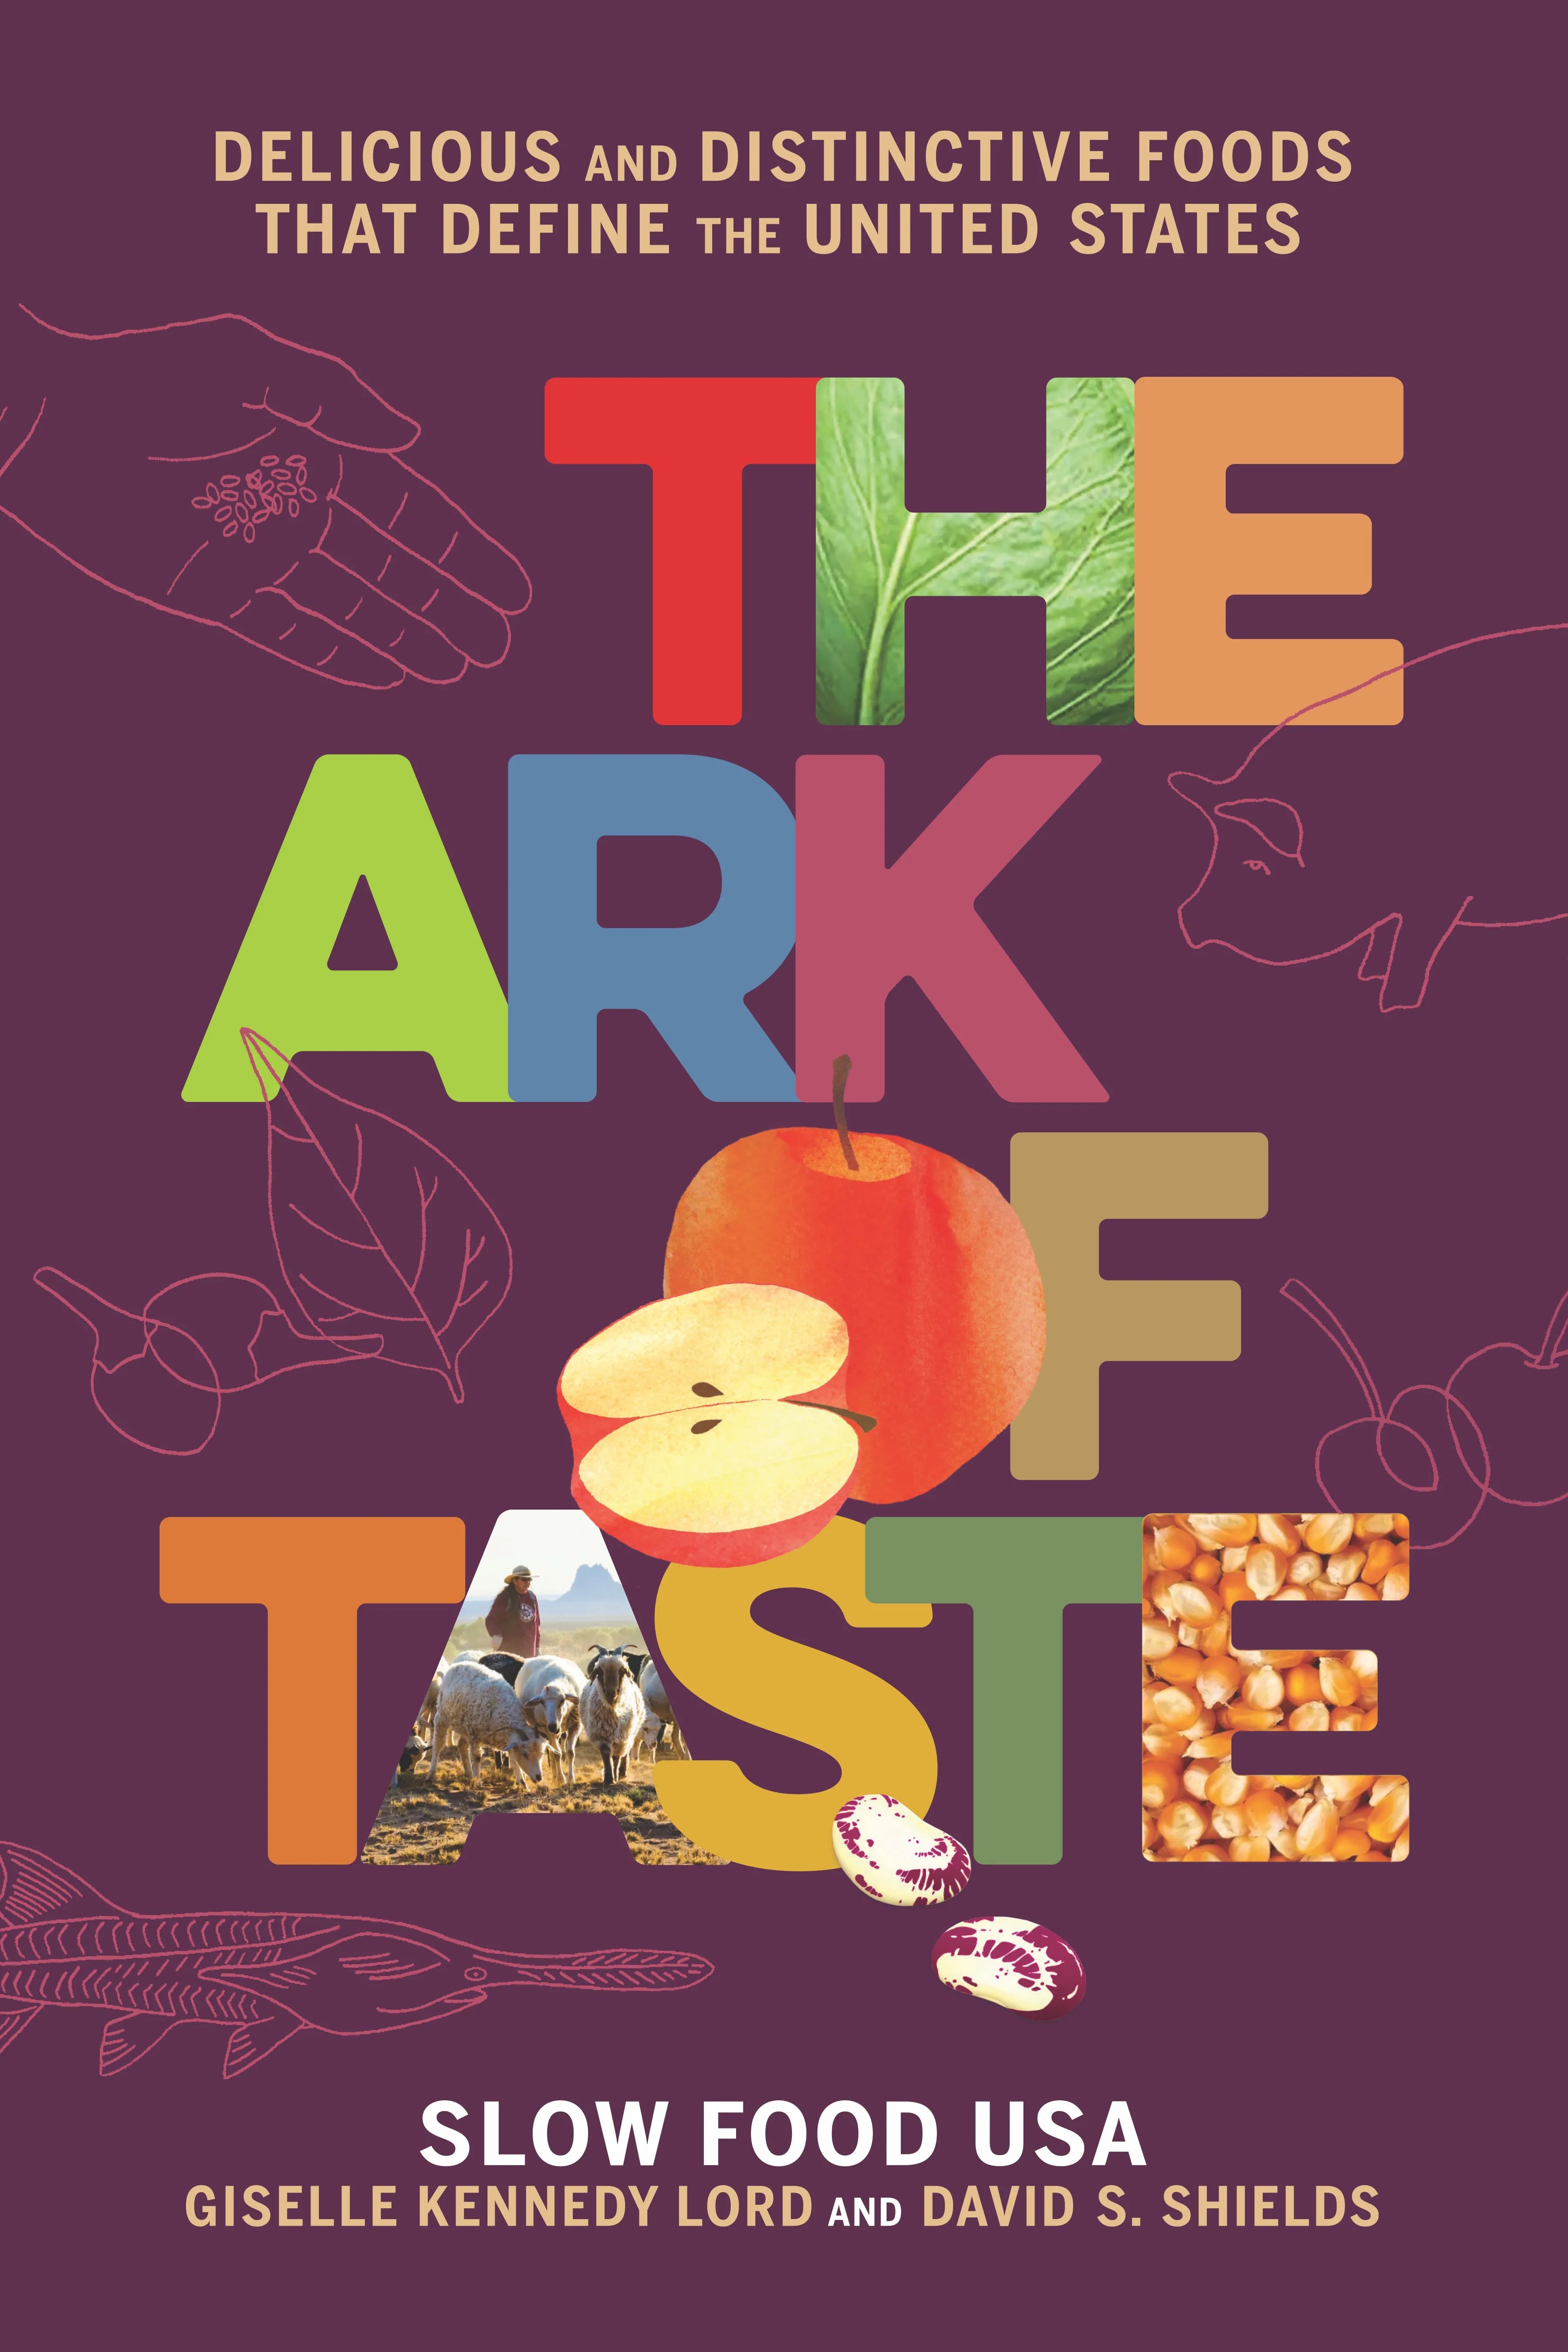 "The Ark of Taste" by Giselle Kennedy Lord and David S. Shields.